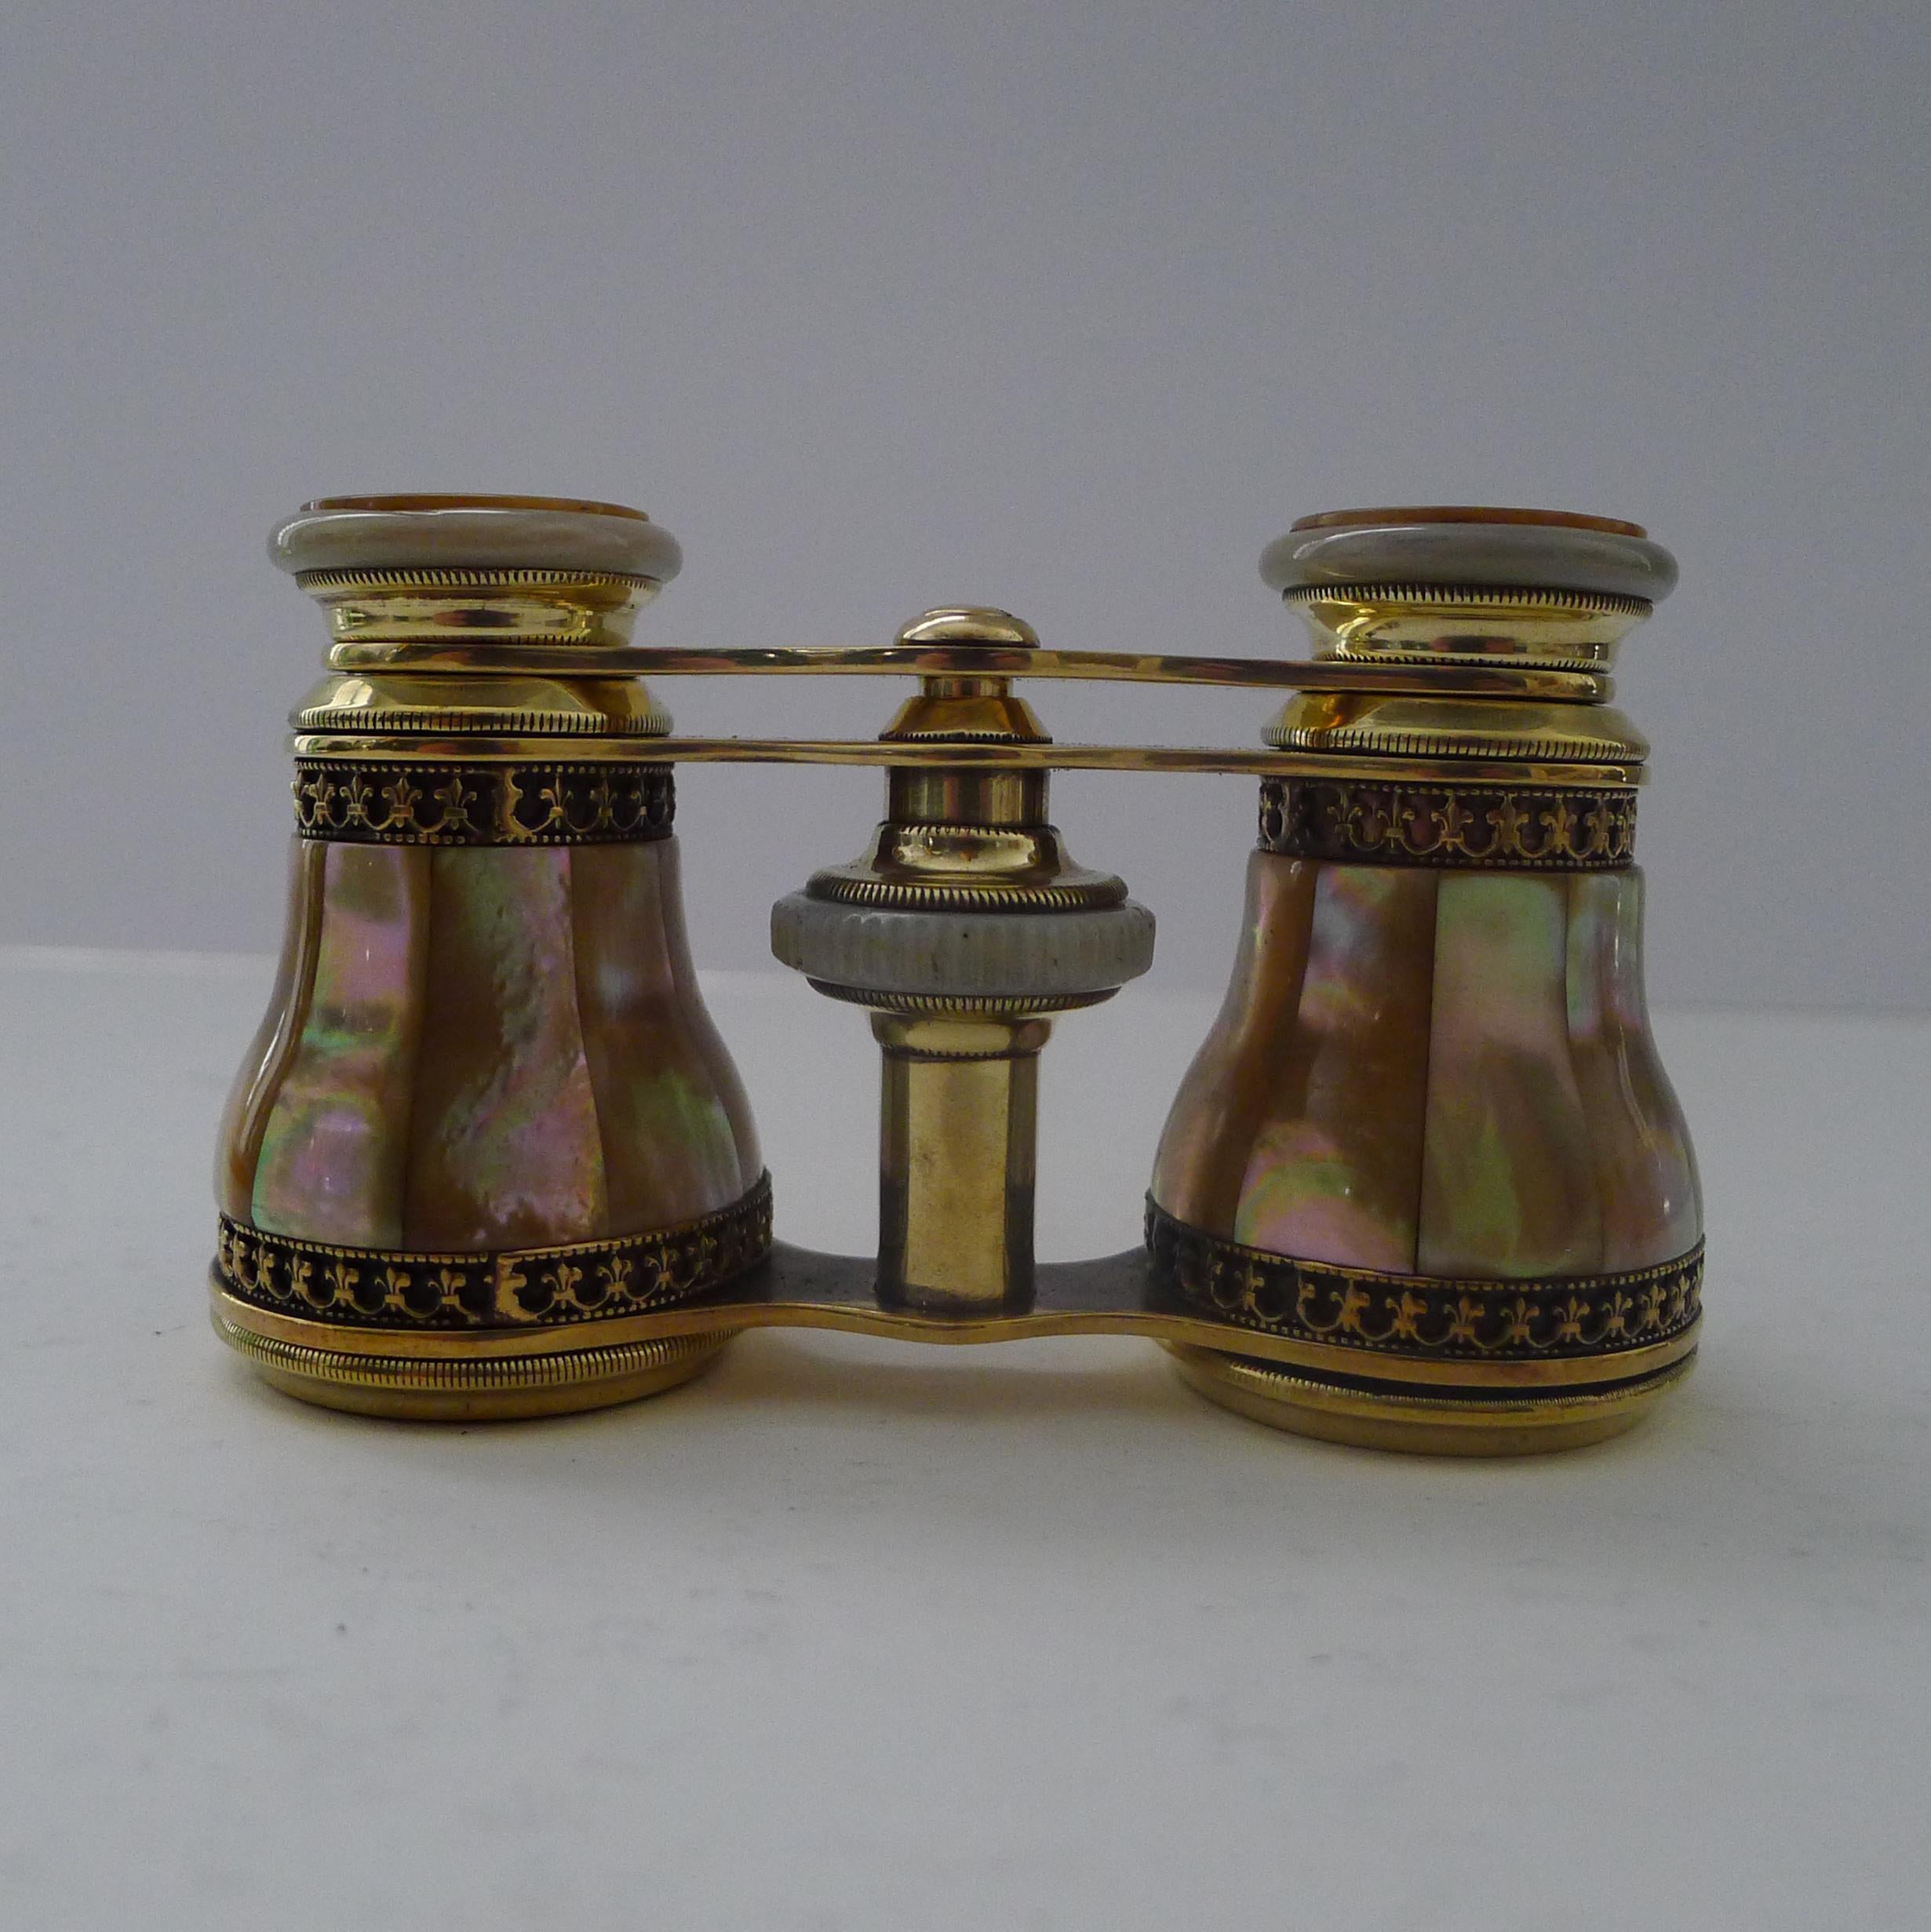 Fine Pair of French Opera Glasses, Mappin & Webb, Paris 1